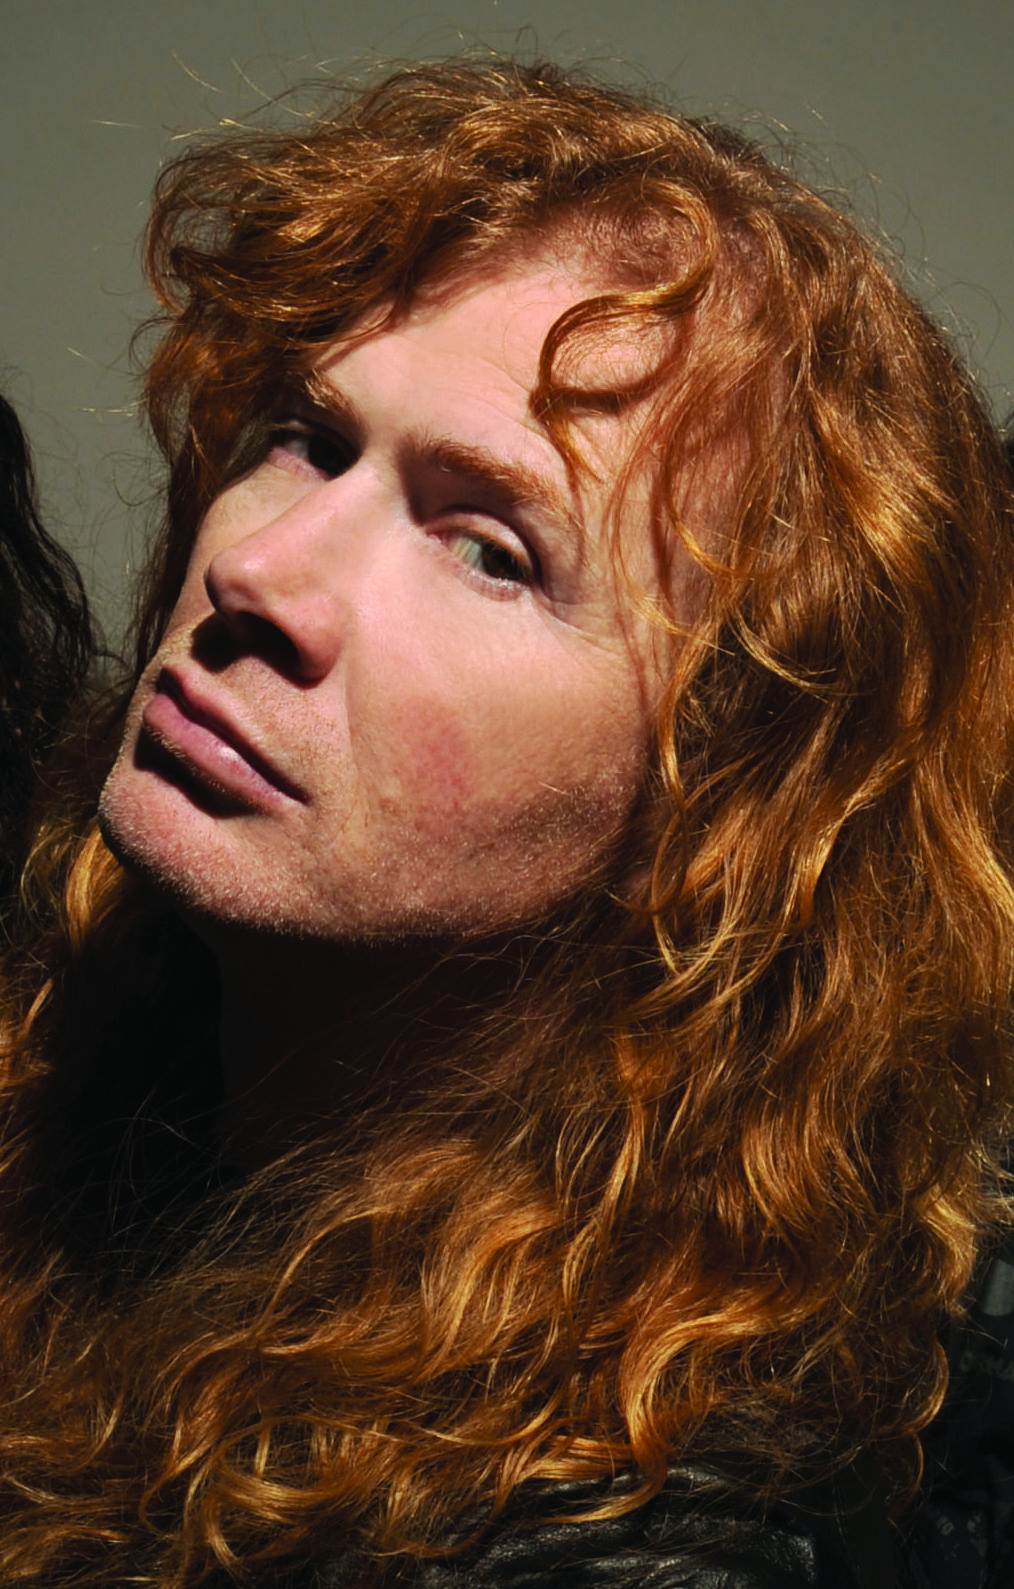 HD Dave Mustaine Wallpaper and Photo. HD Men Wallpaper